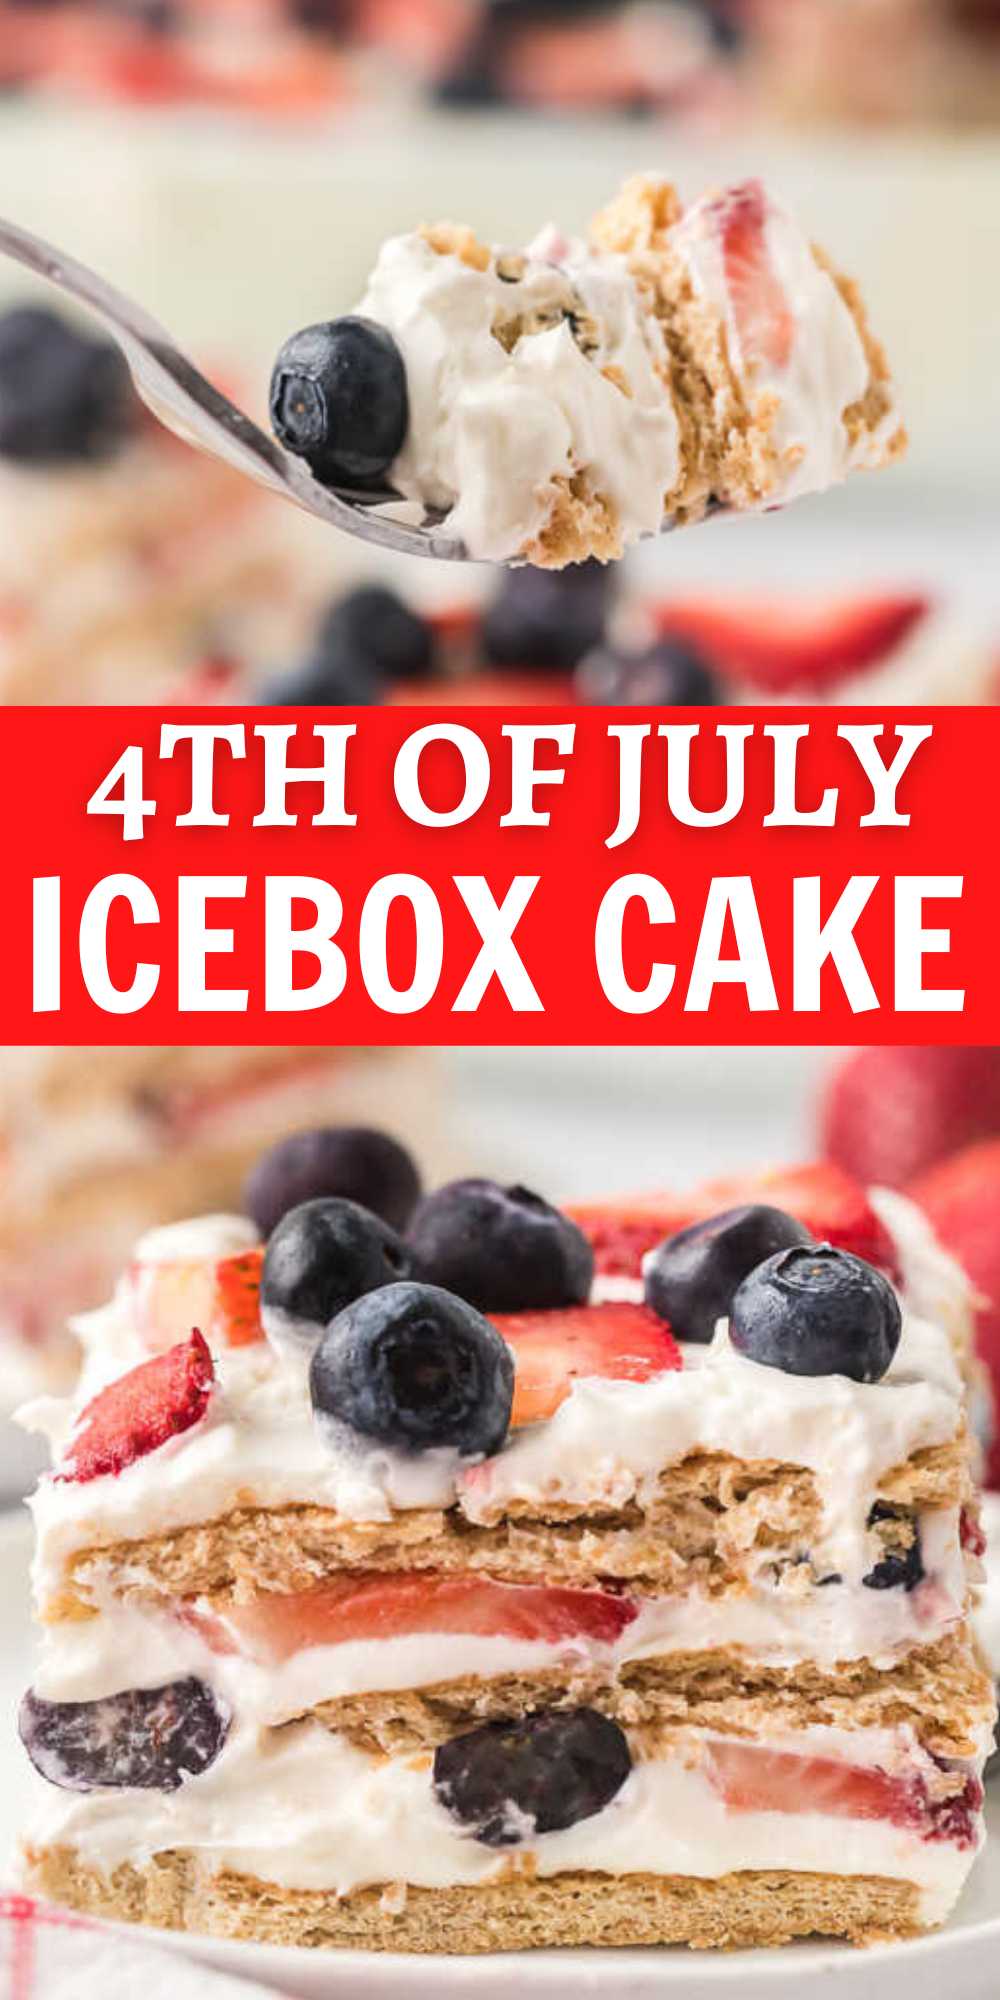 4th of July icebox cake is the perfect no bake treat with tasty layers of cream cheese, fruit and more. The red, white and blue is festive. It is perfect for hot Summer days when you want something sweet but not too heavy. The whipped cream and cream cheese make this dish so creamy and one bite is never enough. #eatingonadime #4thofJulyiceboxcake #redwhiteandbluedessert